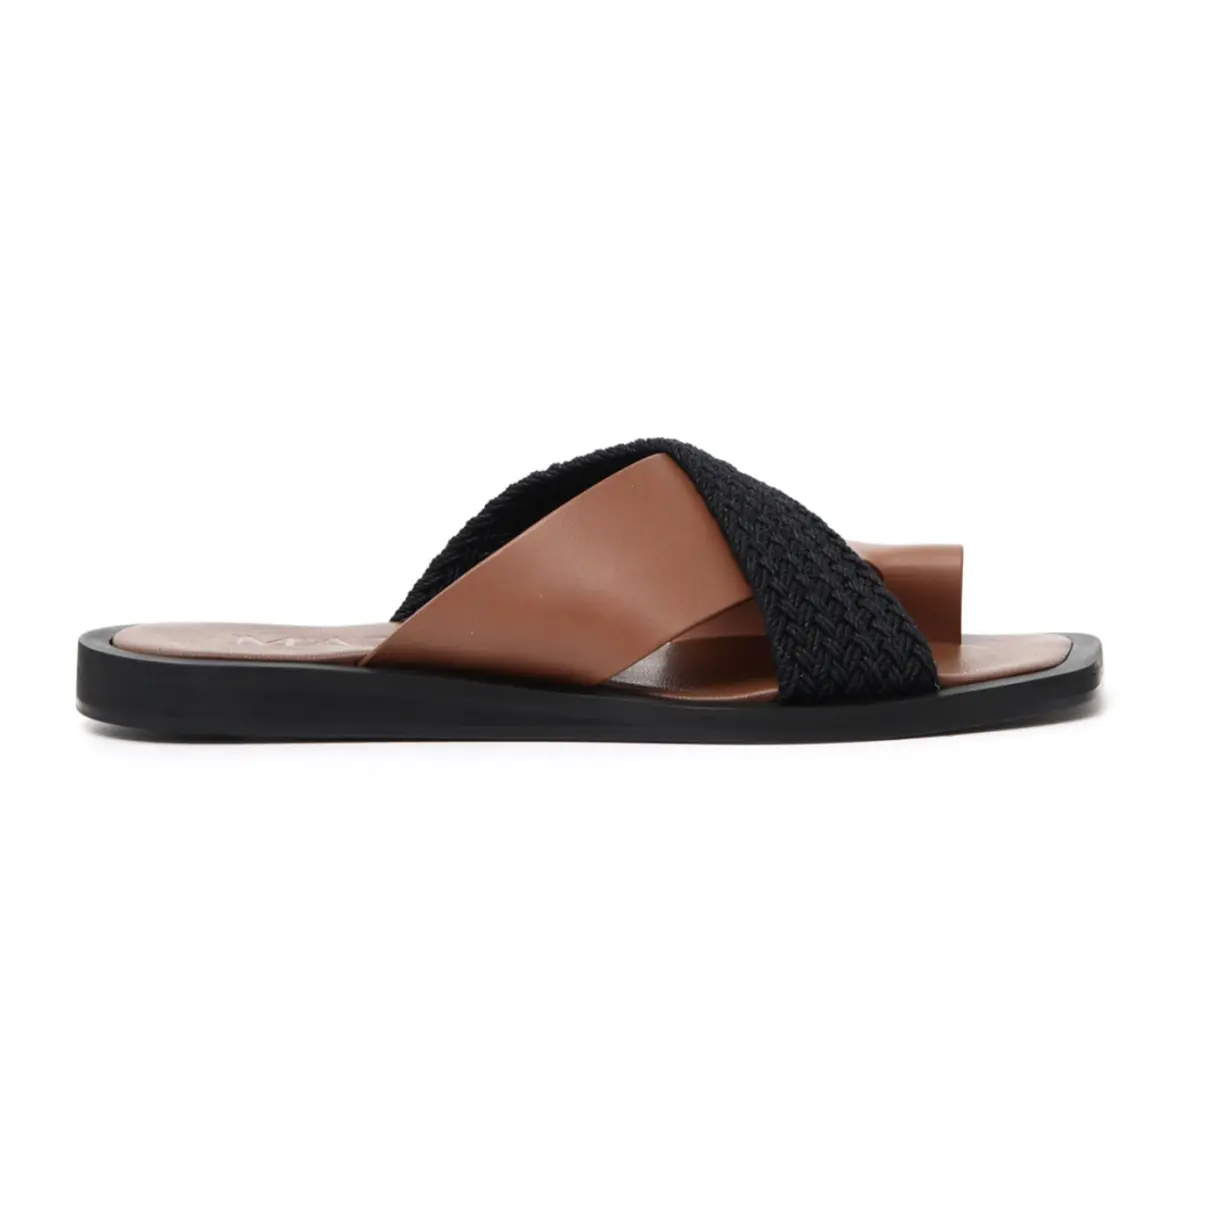 Buy Max Mara Leather mules online